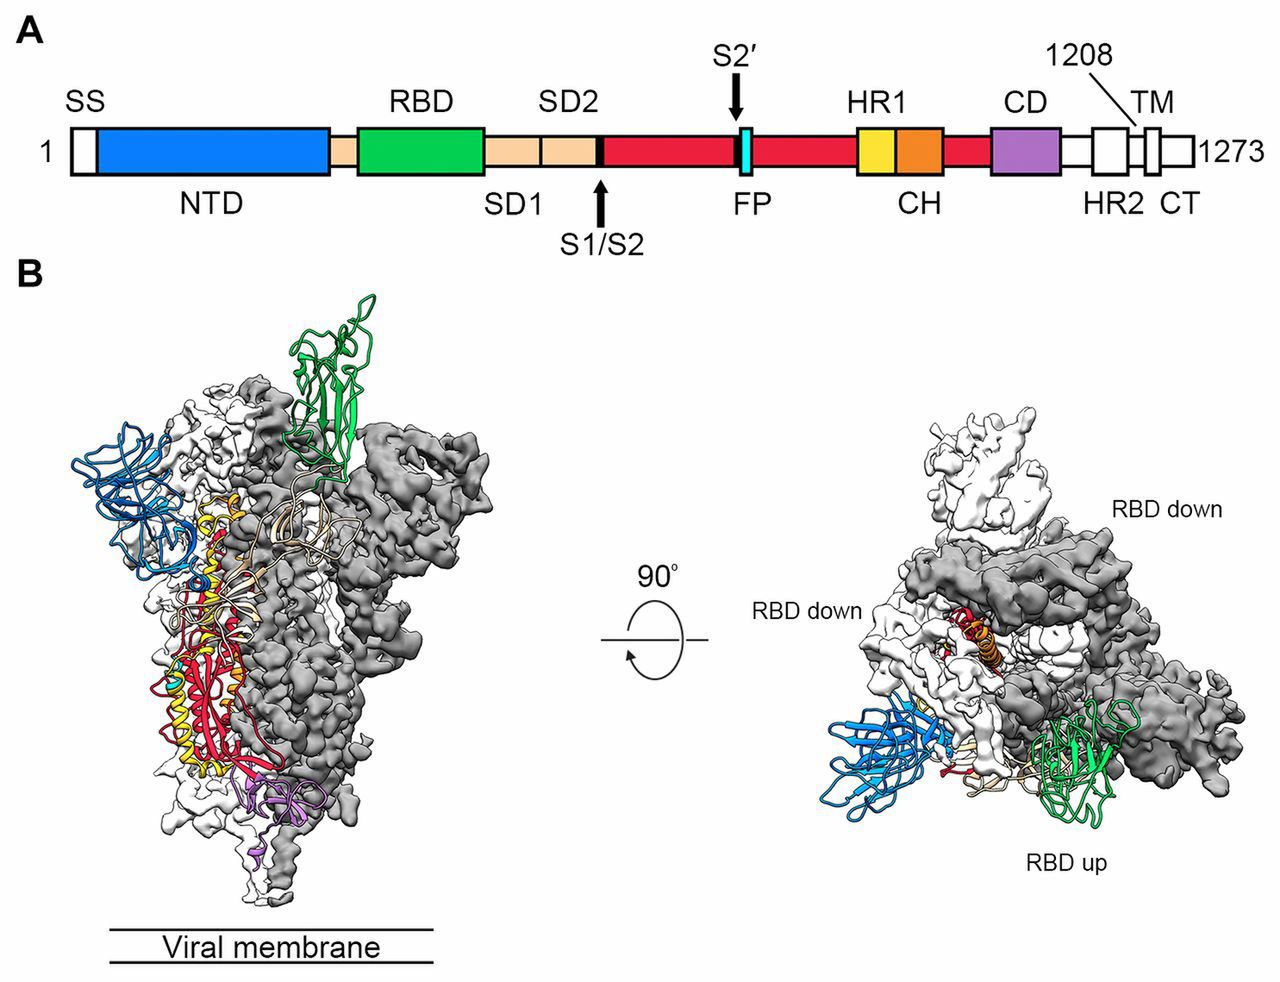 (źródło: "Cryo-EM structure of the 2019-nCoV spike in the prefusion conformation")